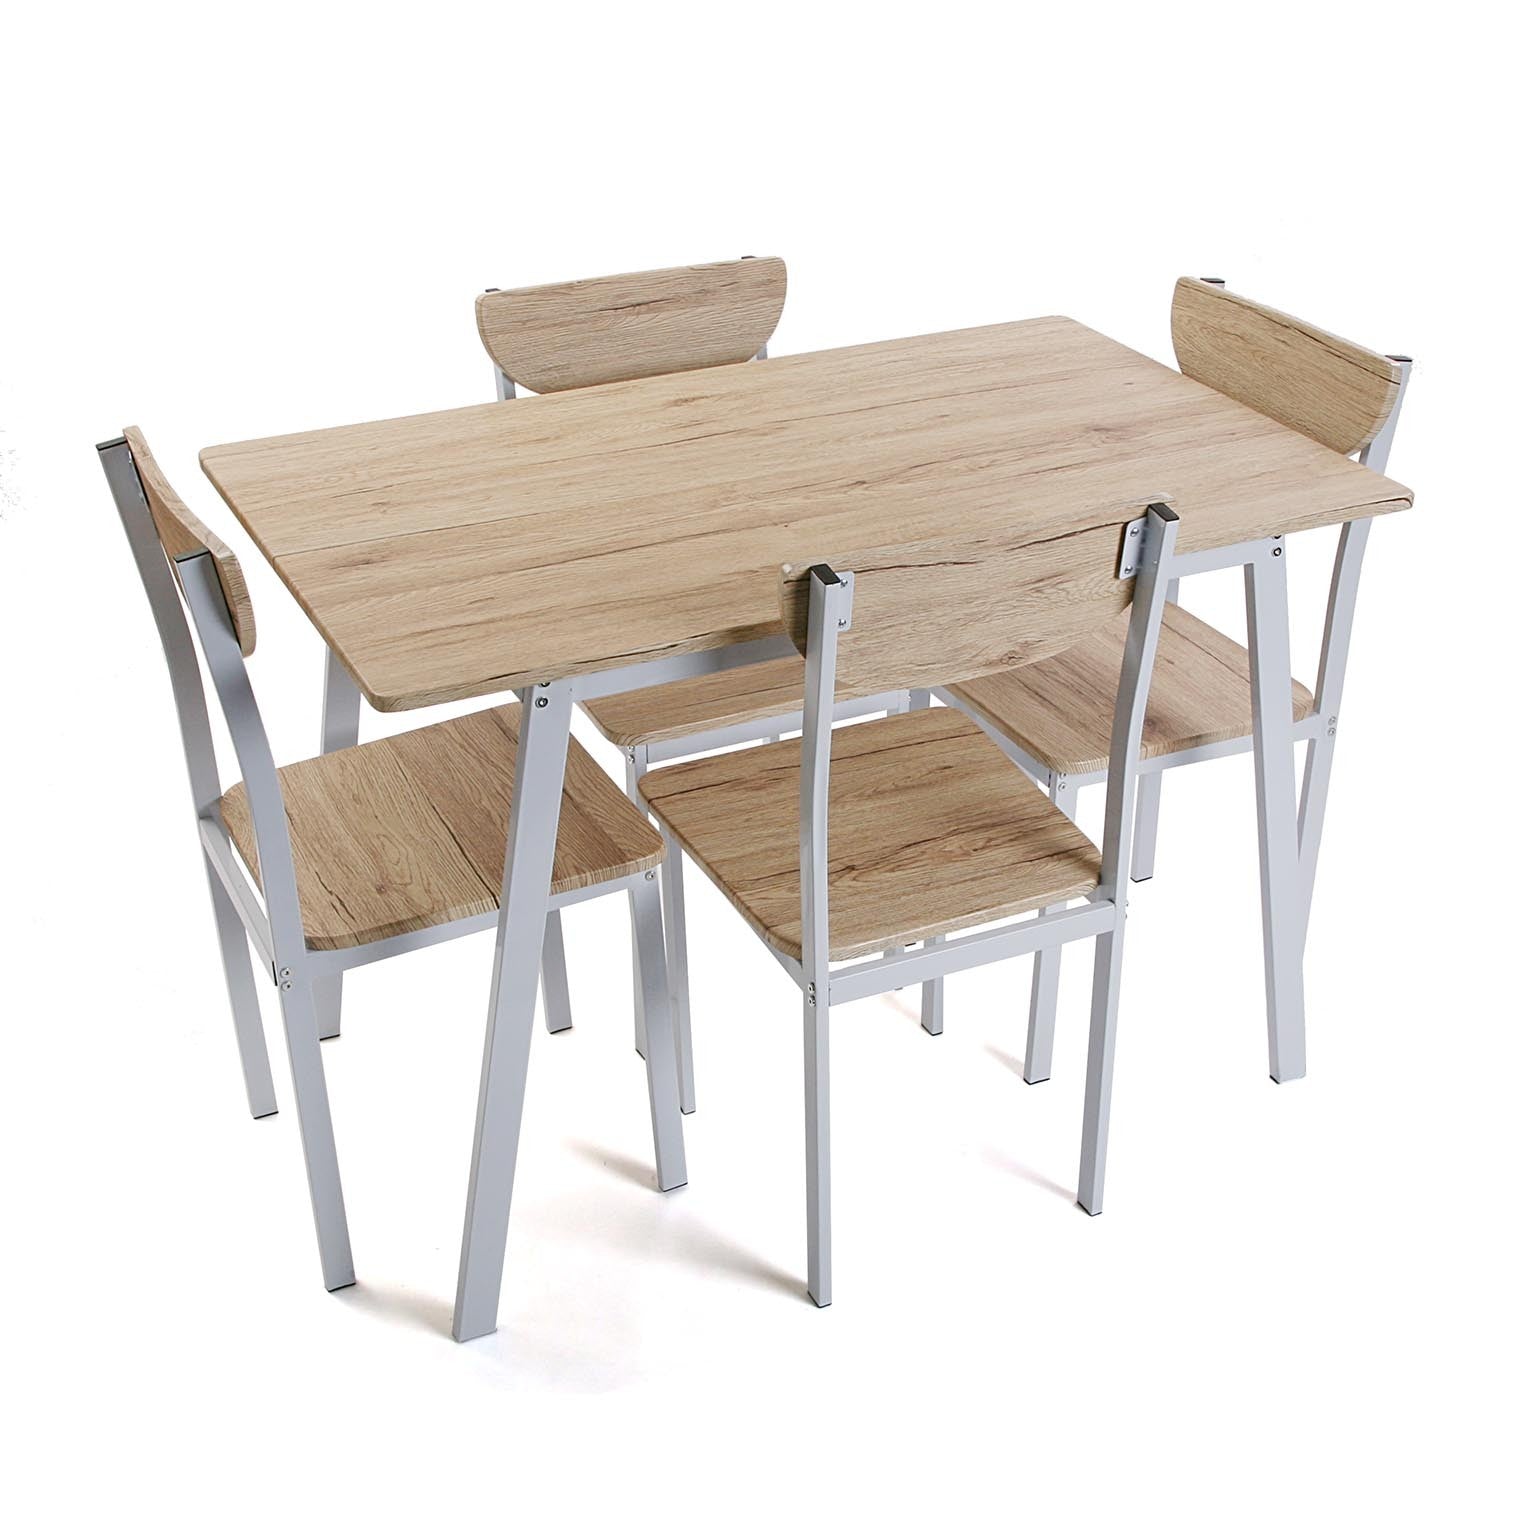 Versa Wood and White Scandinavian Design Kitchen Table and 4 Chairs Set